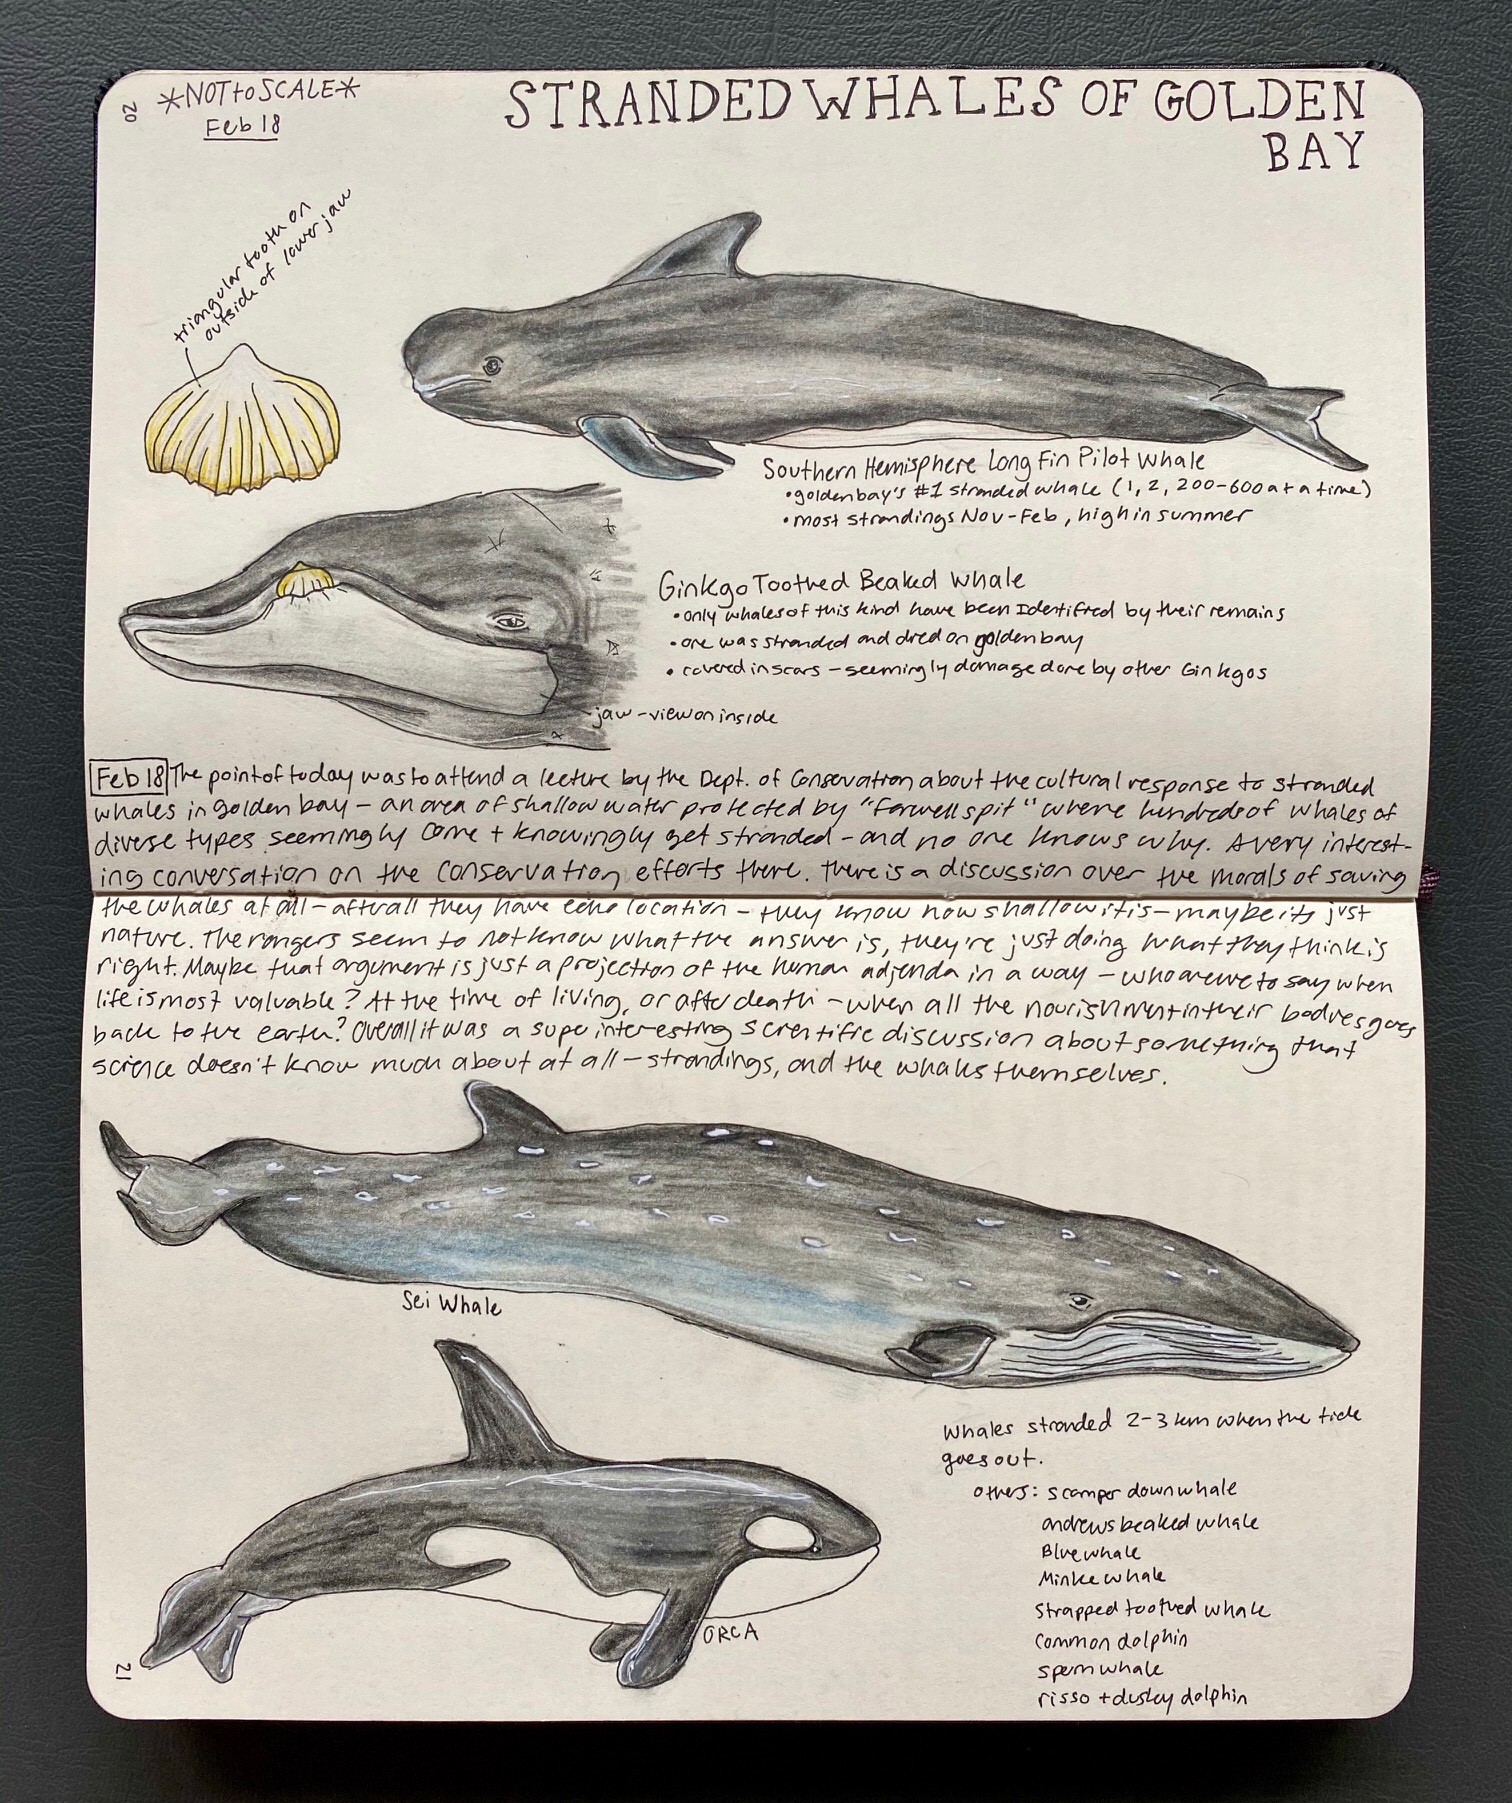 Field drawings of whales